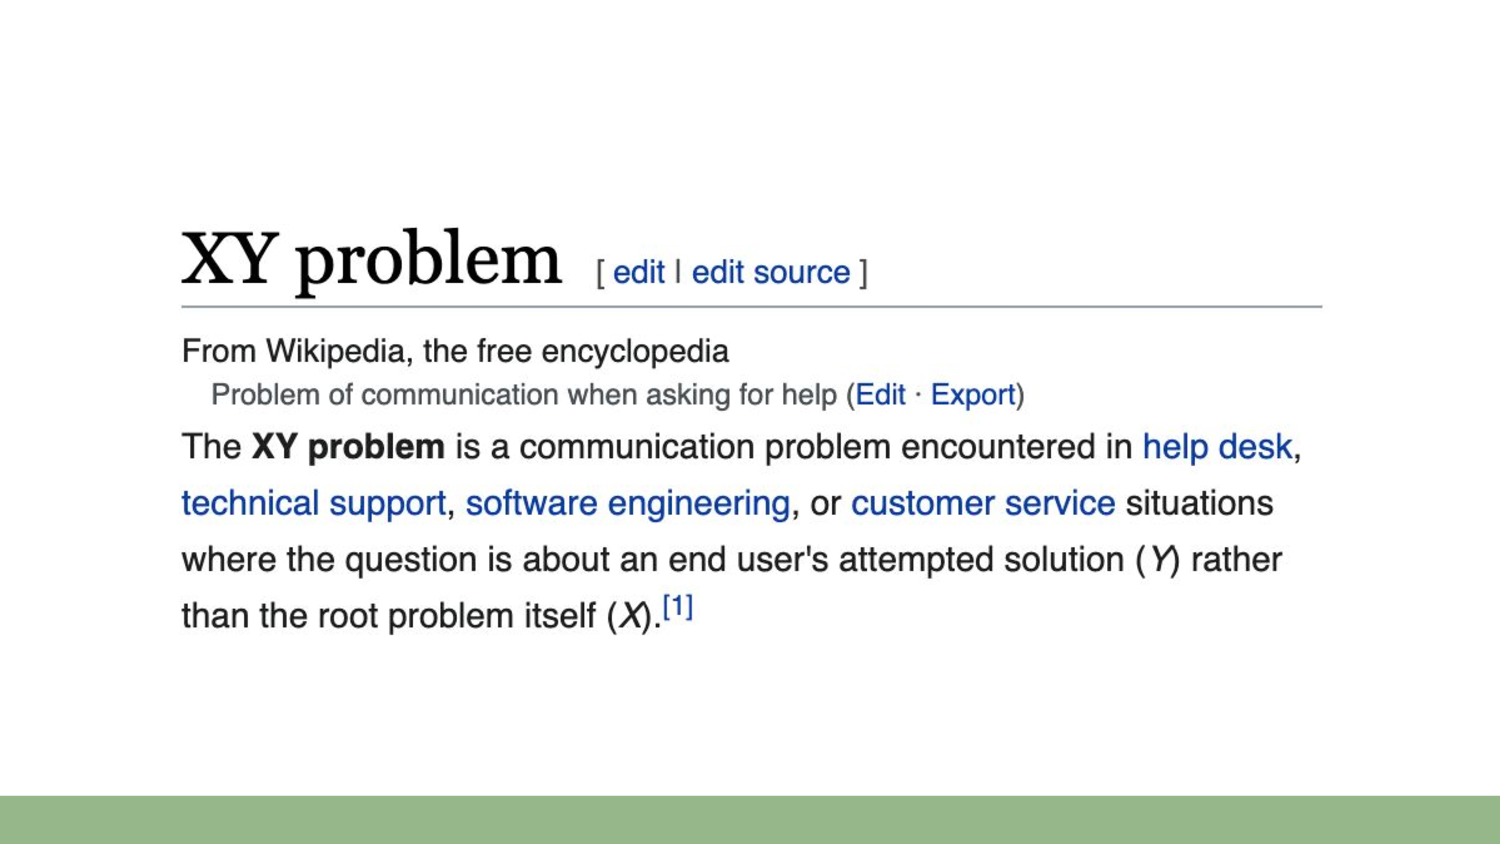 Screenshot of the Wikipedia article on the XY problem. 'The XY problem is a communication problem encountered in help desk, technical support, software engineering, or customer service situations where the question is about an end user's attempted solution (Y) rather than the root problem itself (X).'